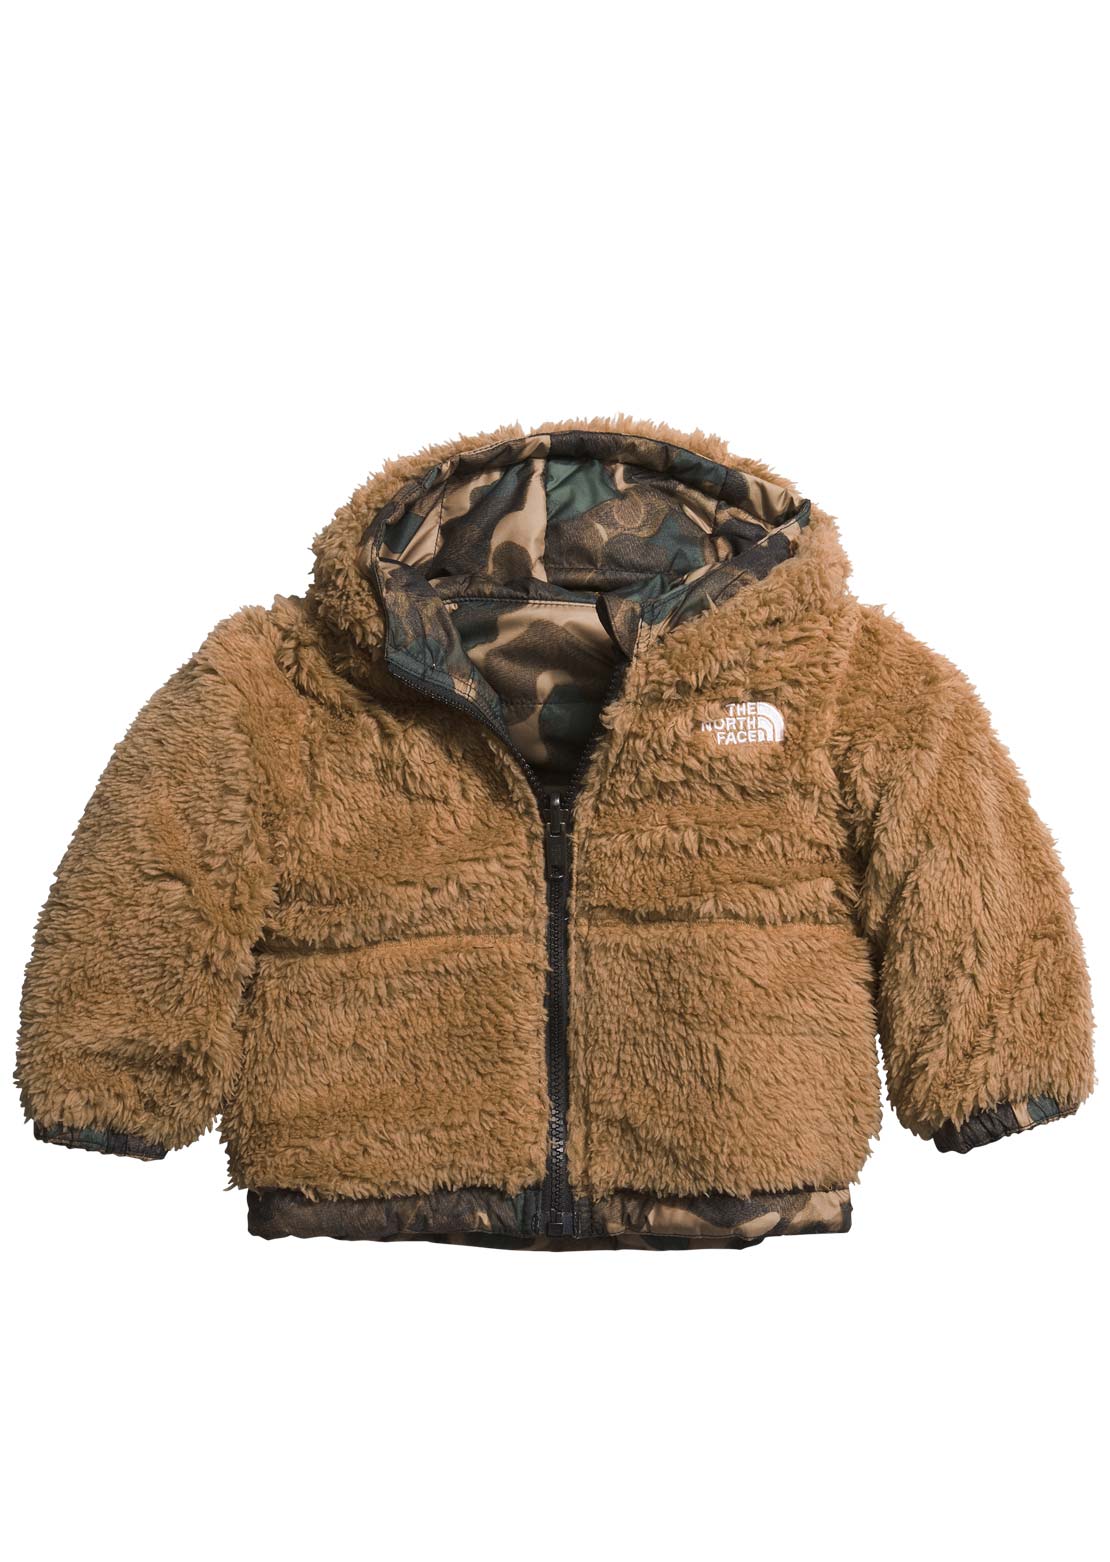 The North Face Infant Reversible Mt Chimbo Full Zip Hooded Jacket Utility Brown Camo Texture Small Print